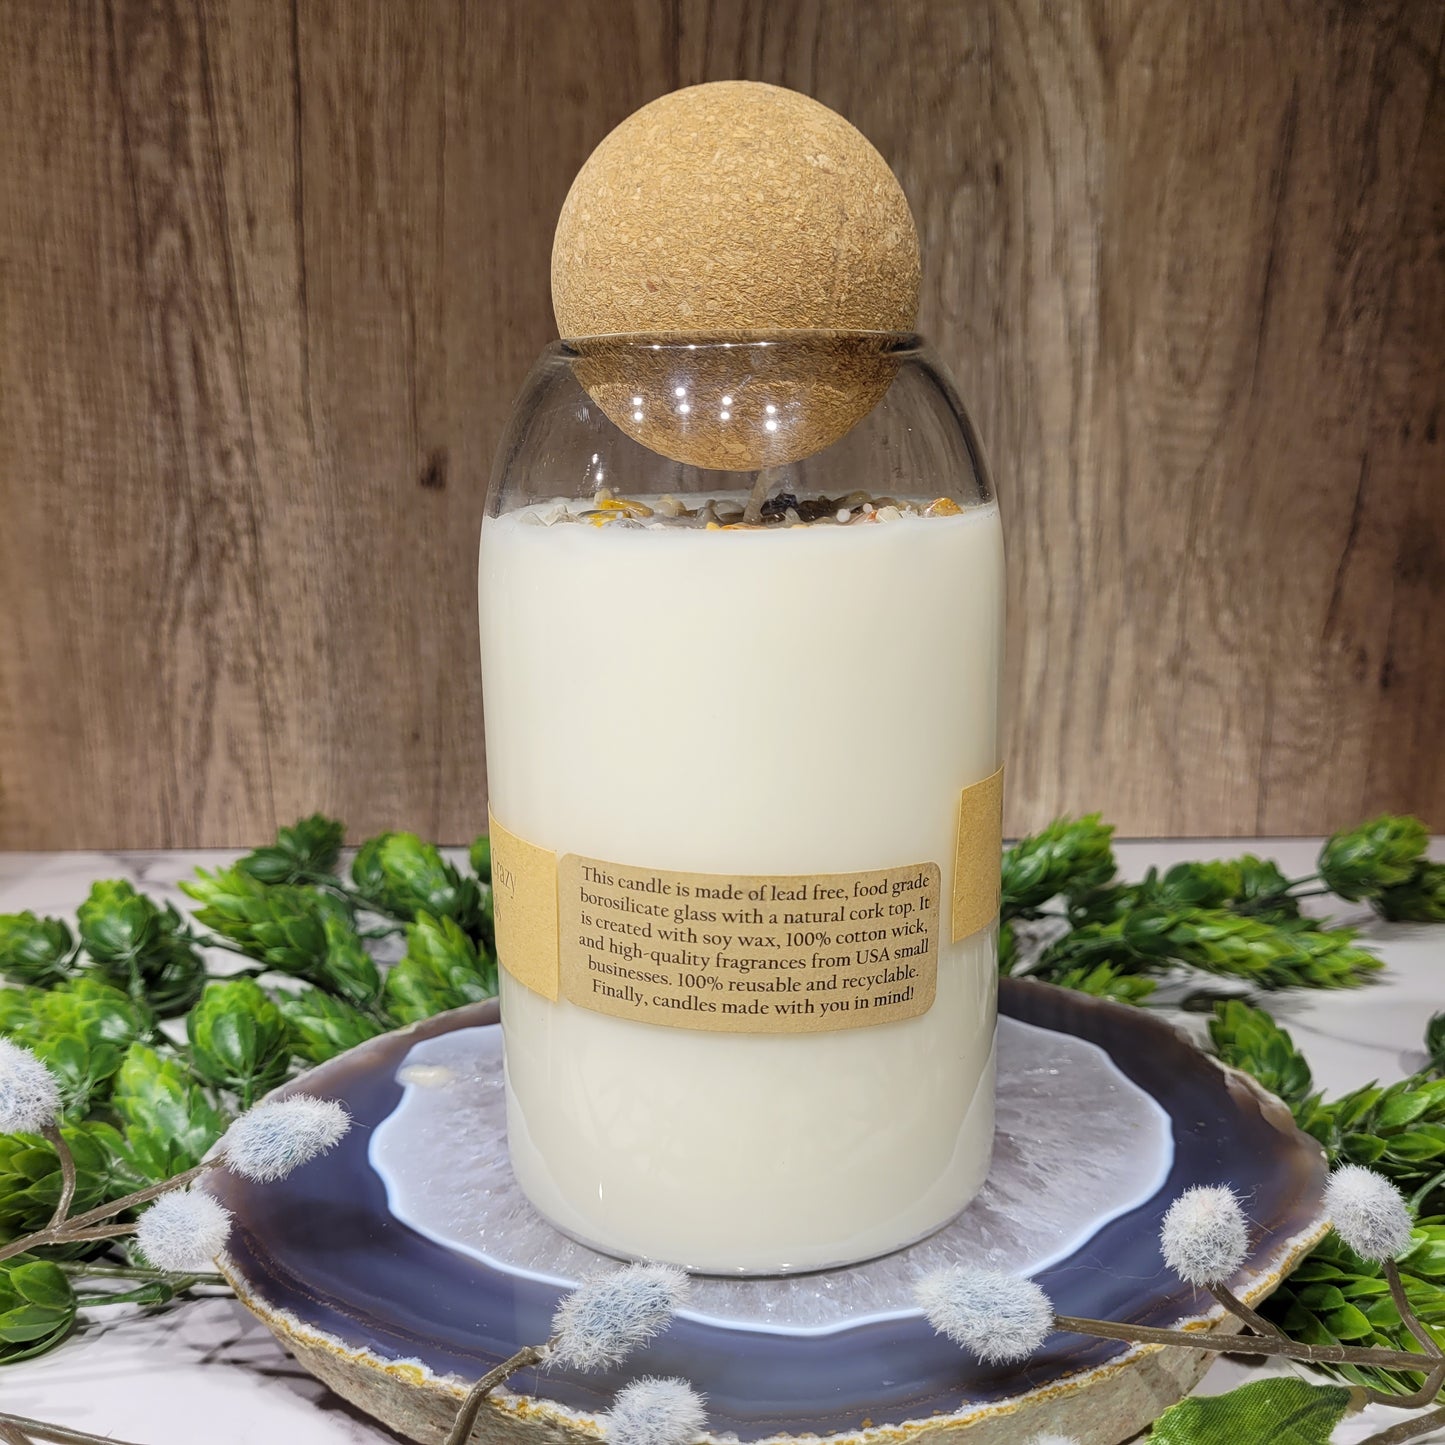 Fresh Linen Soy Candle